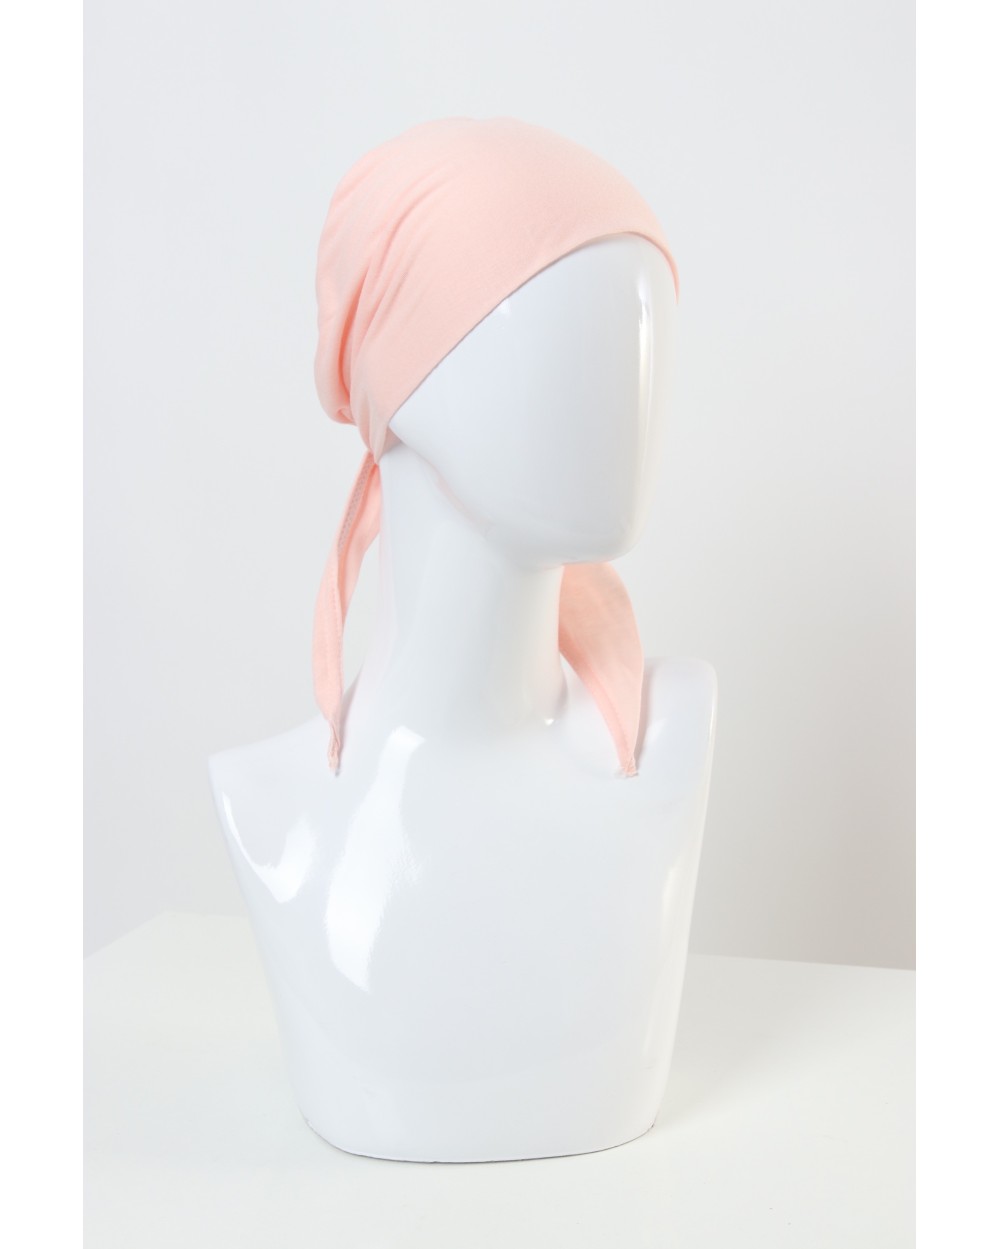 Cotton cap that attaches for hijab